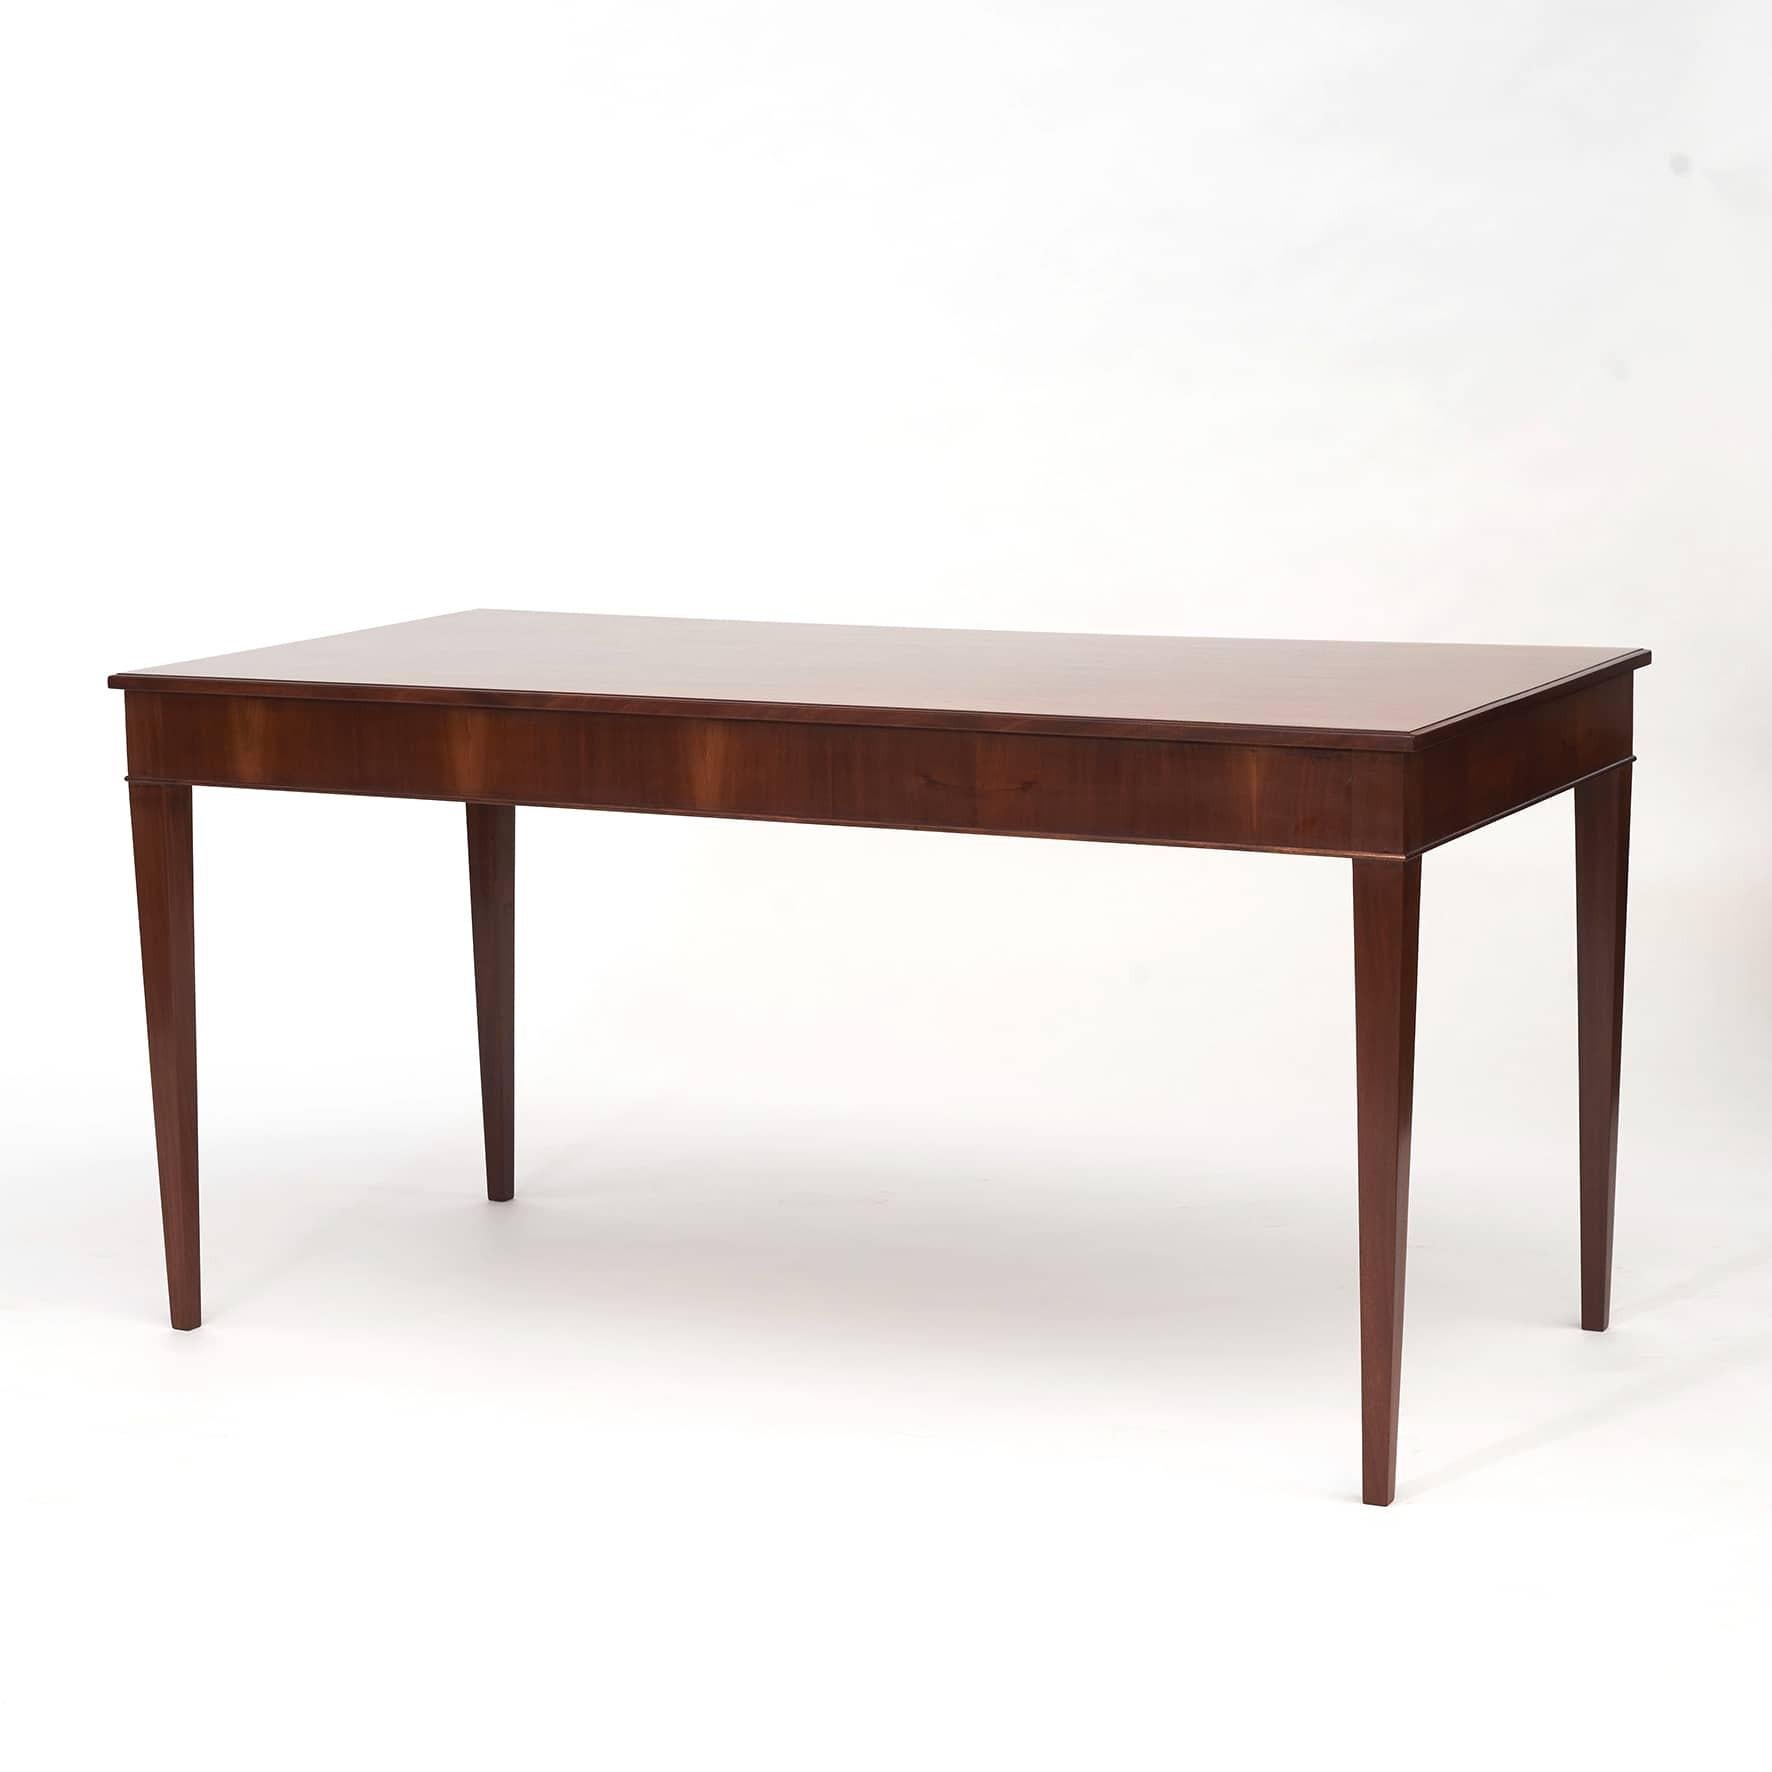 Frits Henningsen, Danish furniture designer and cabinet maker (1889-1965).
Solid mahogany writing table.
Rectangular top with with molded edge above three cock beaded drawers with moulded edge. Raised on elegant square tapered legs. Original key,